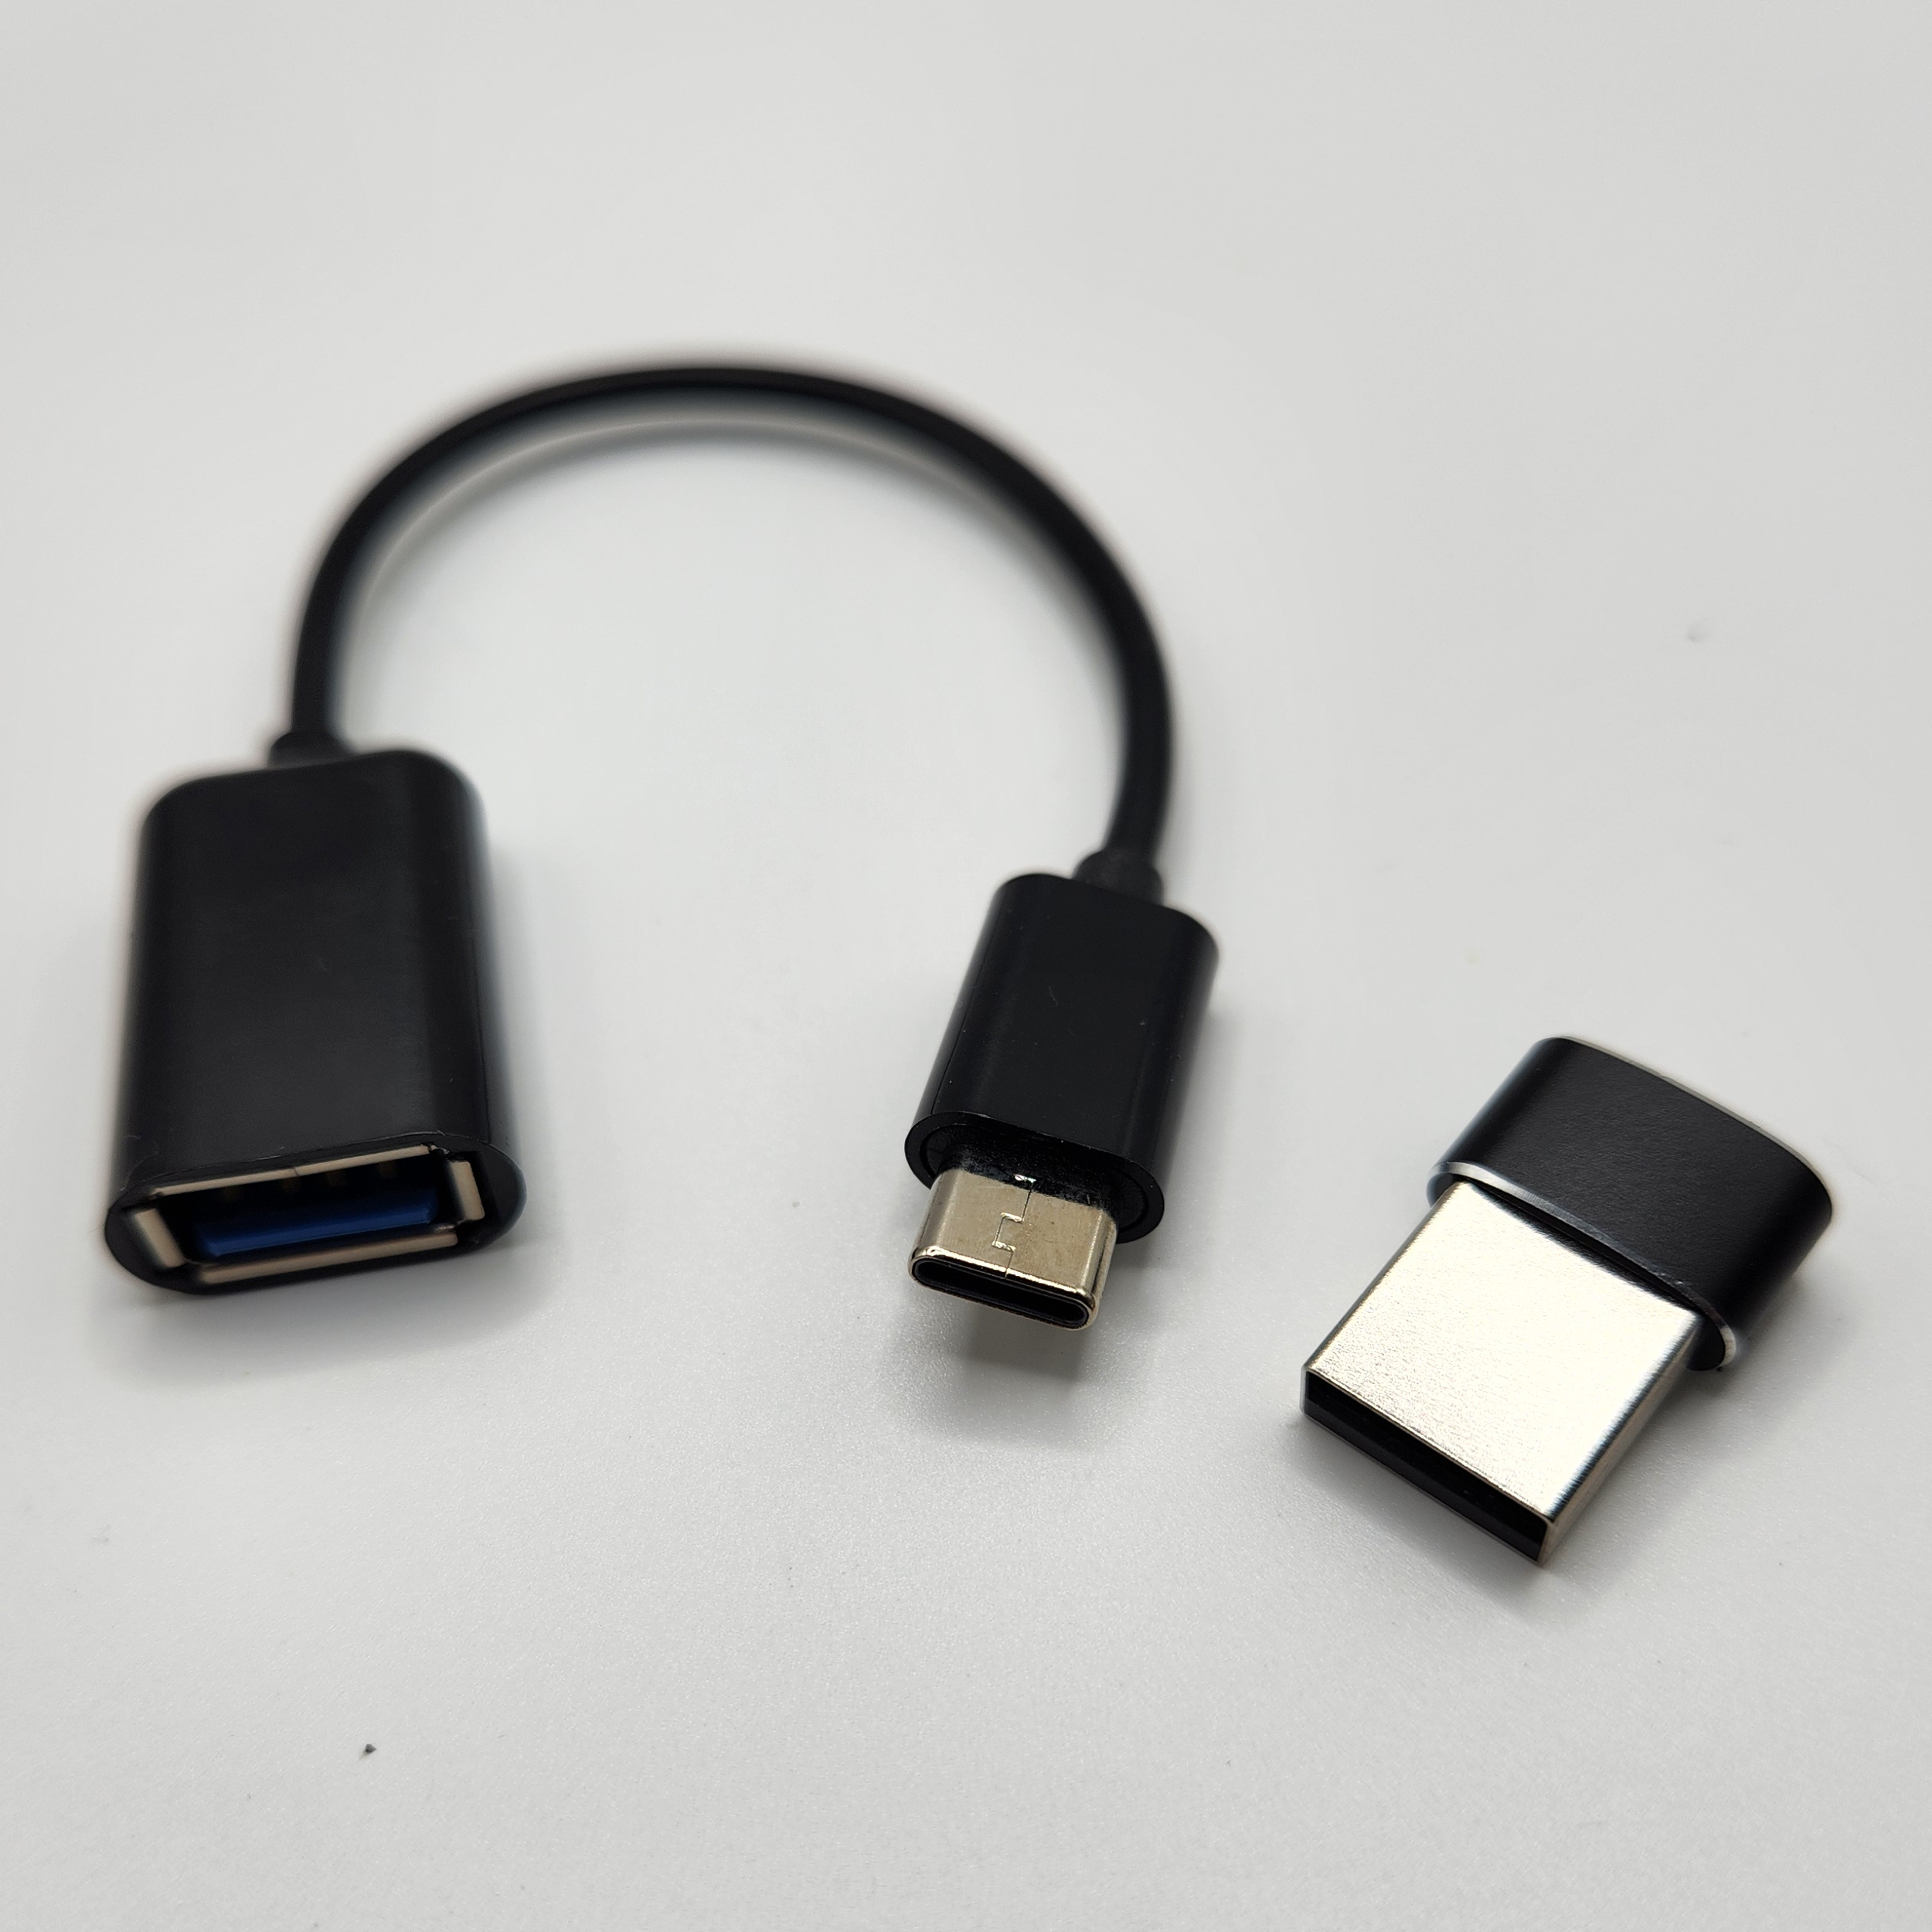 USB-A to USB-C Adapter Set